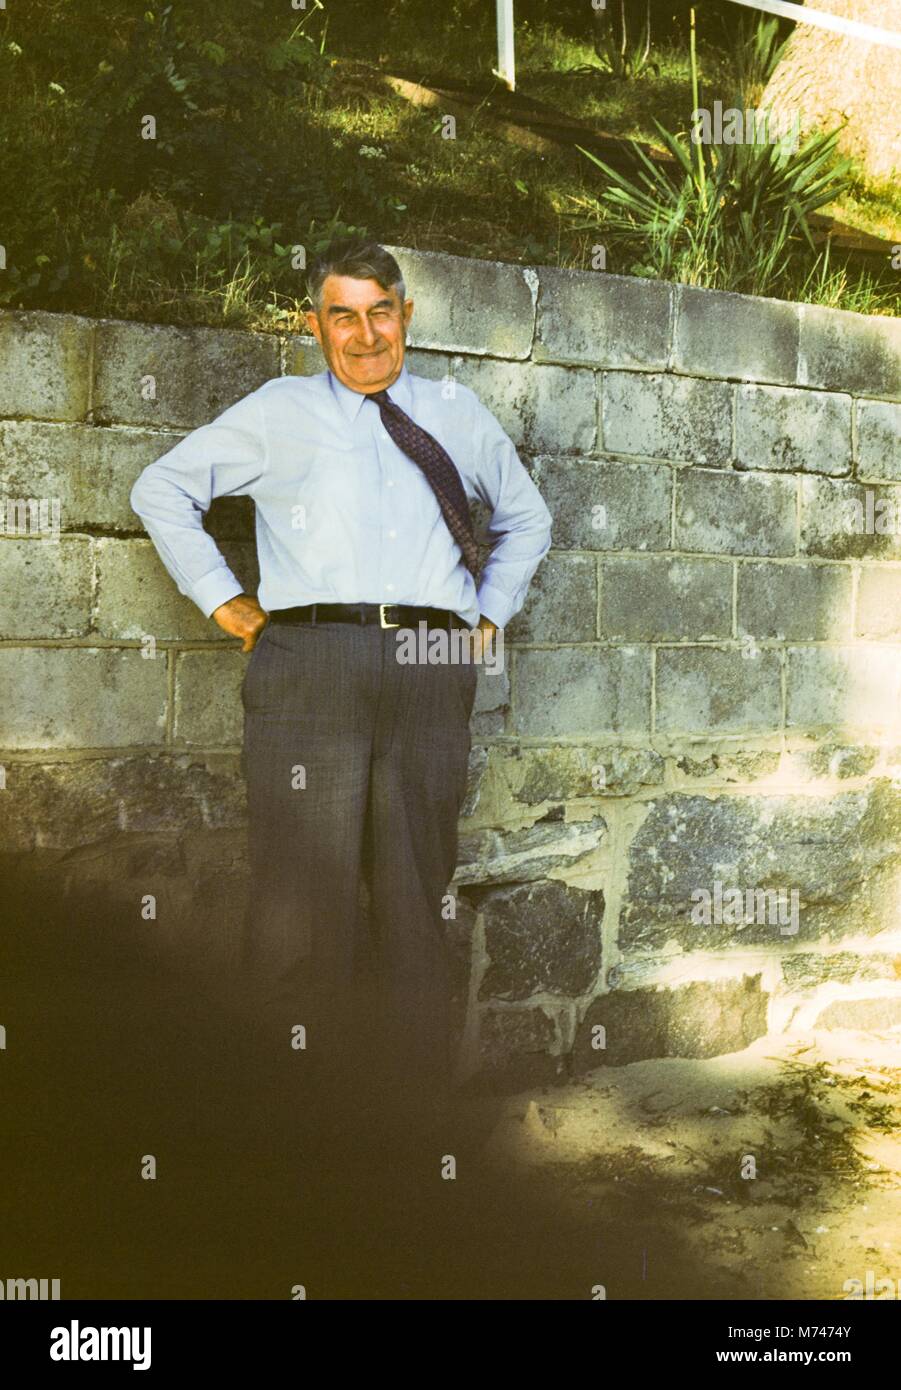 A mature man wearing dress clothes and a tie poses with his hands on his hips by a concrete retaining wall, 1955. () Stock Photo